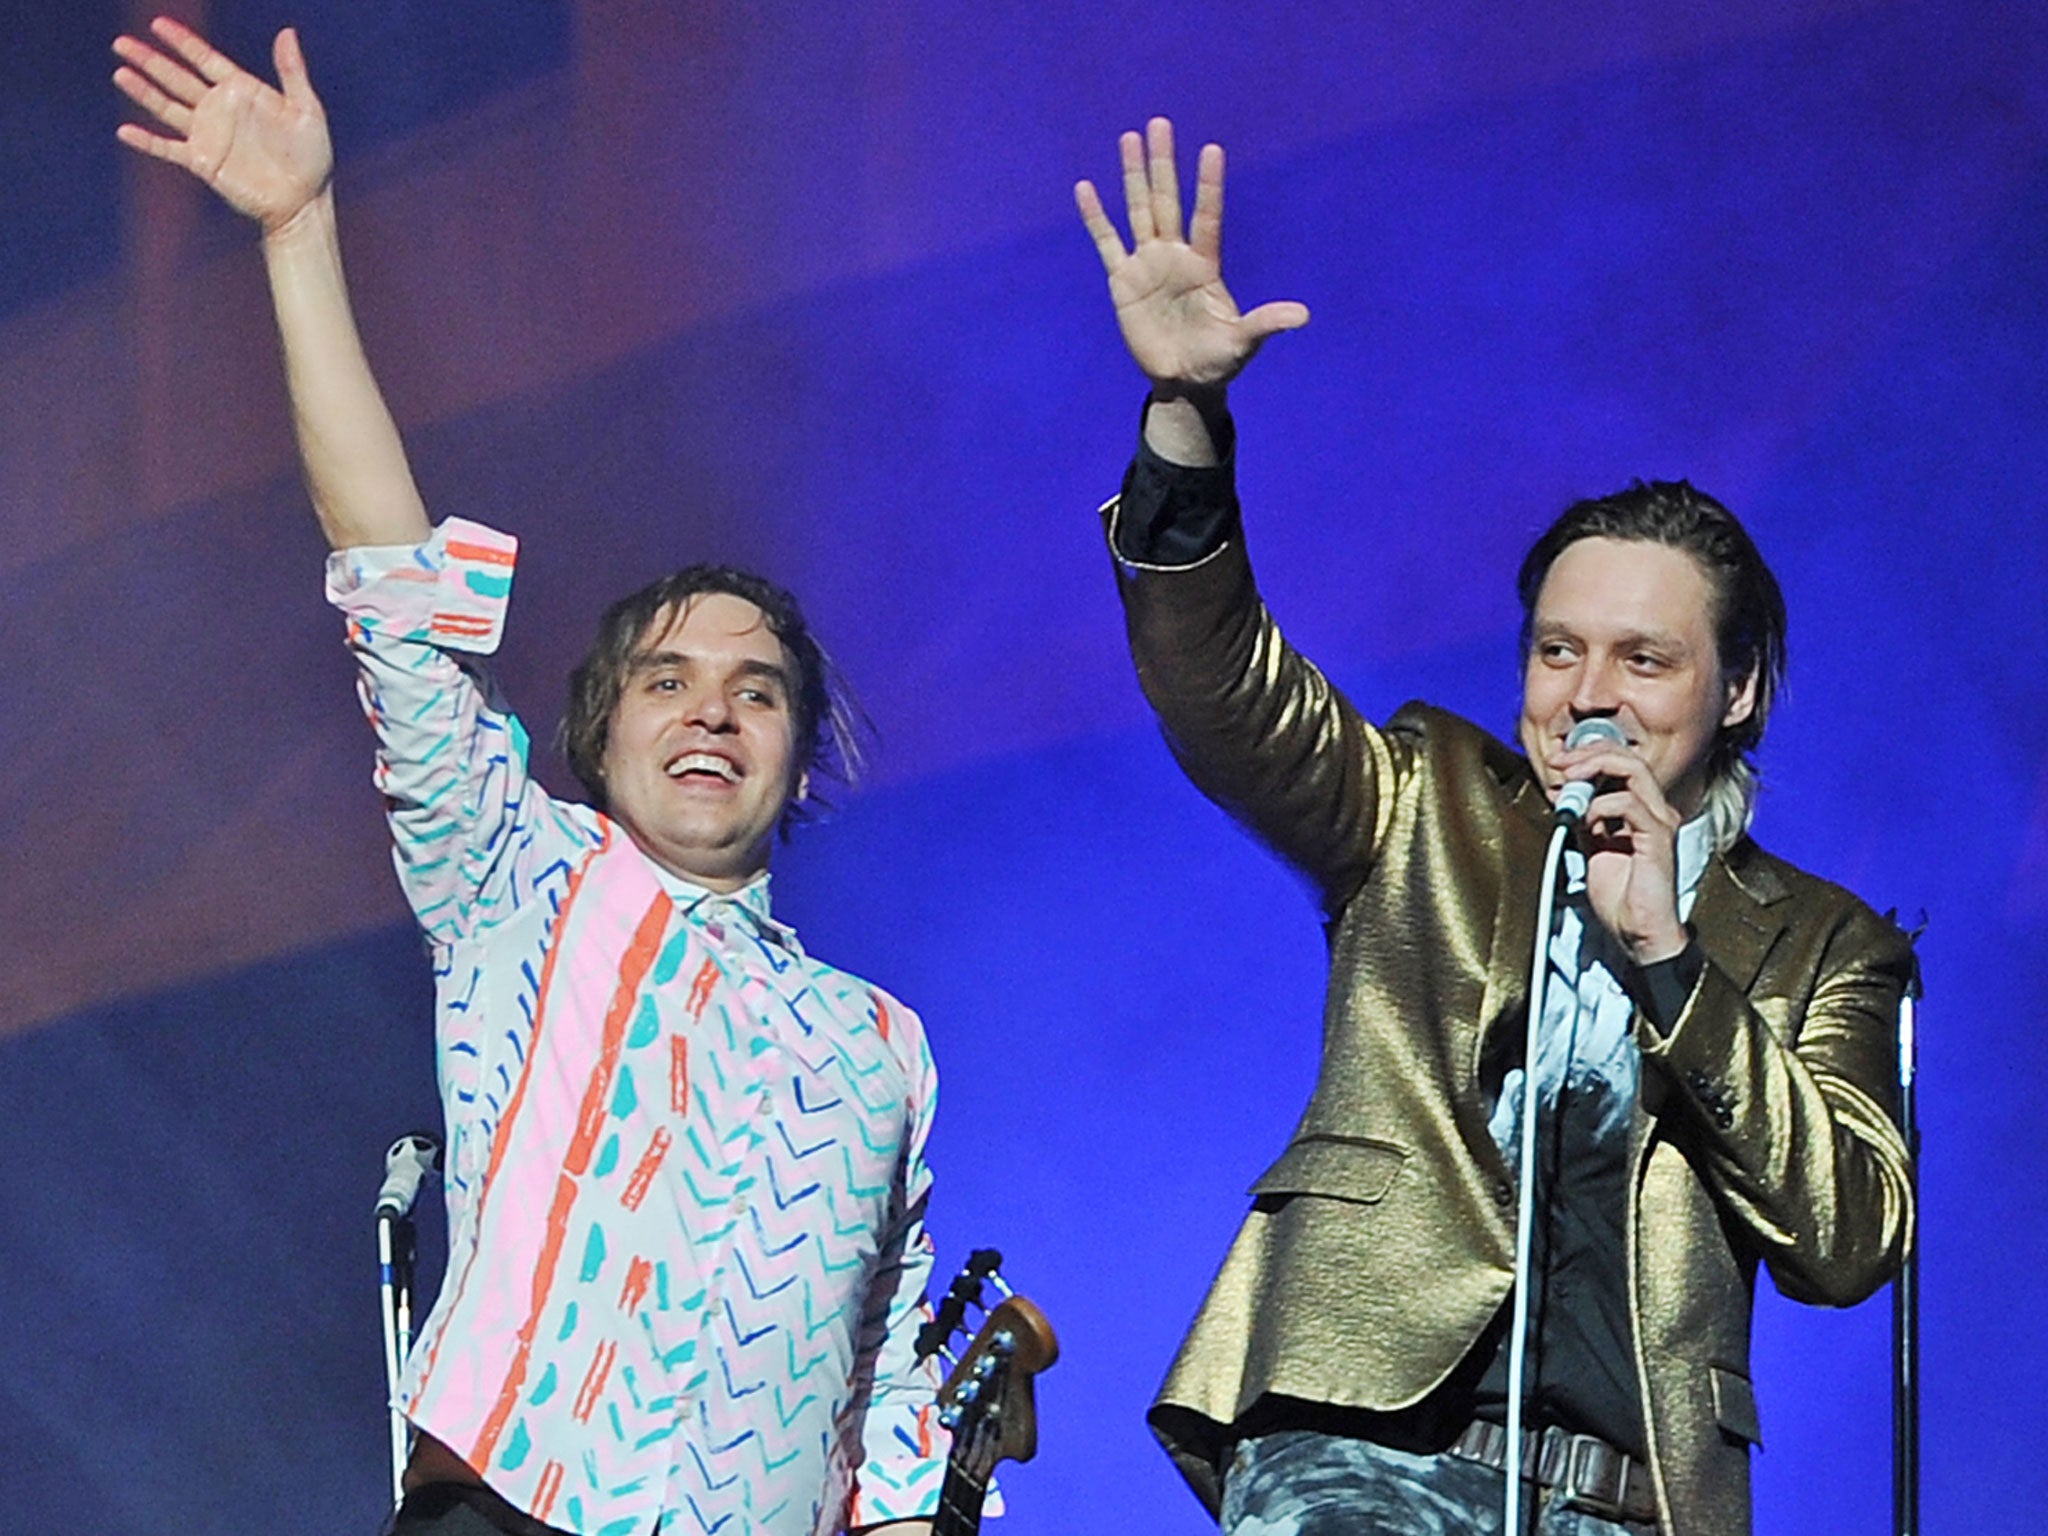 Win Butler and his Canadian band Arcade Fire